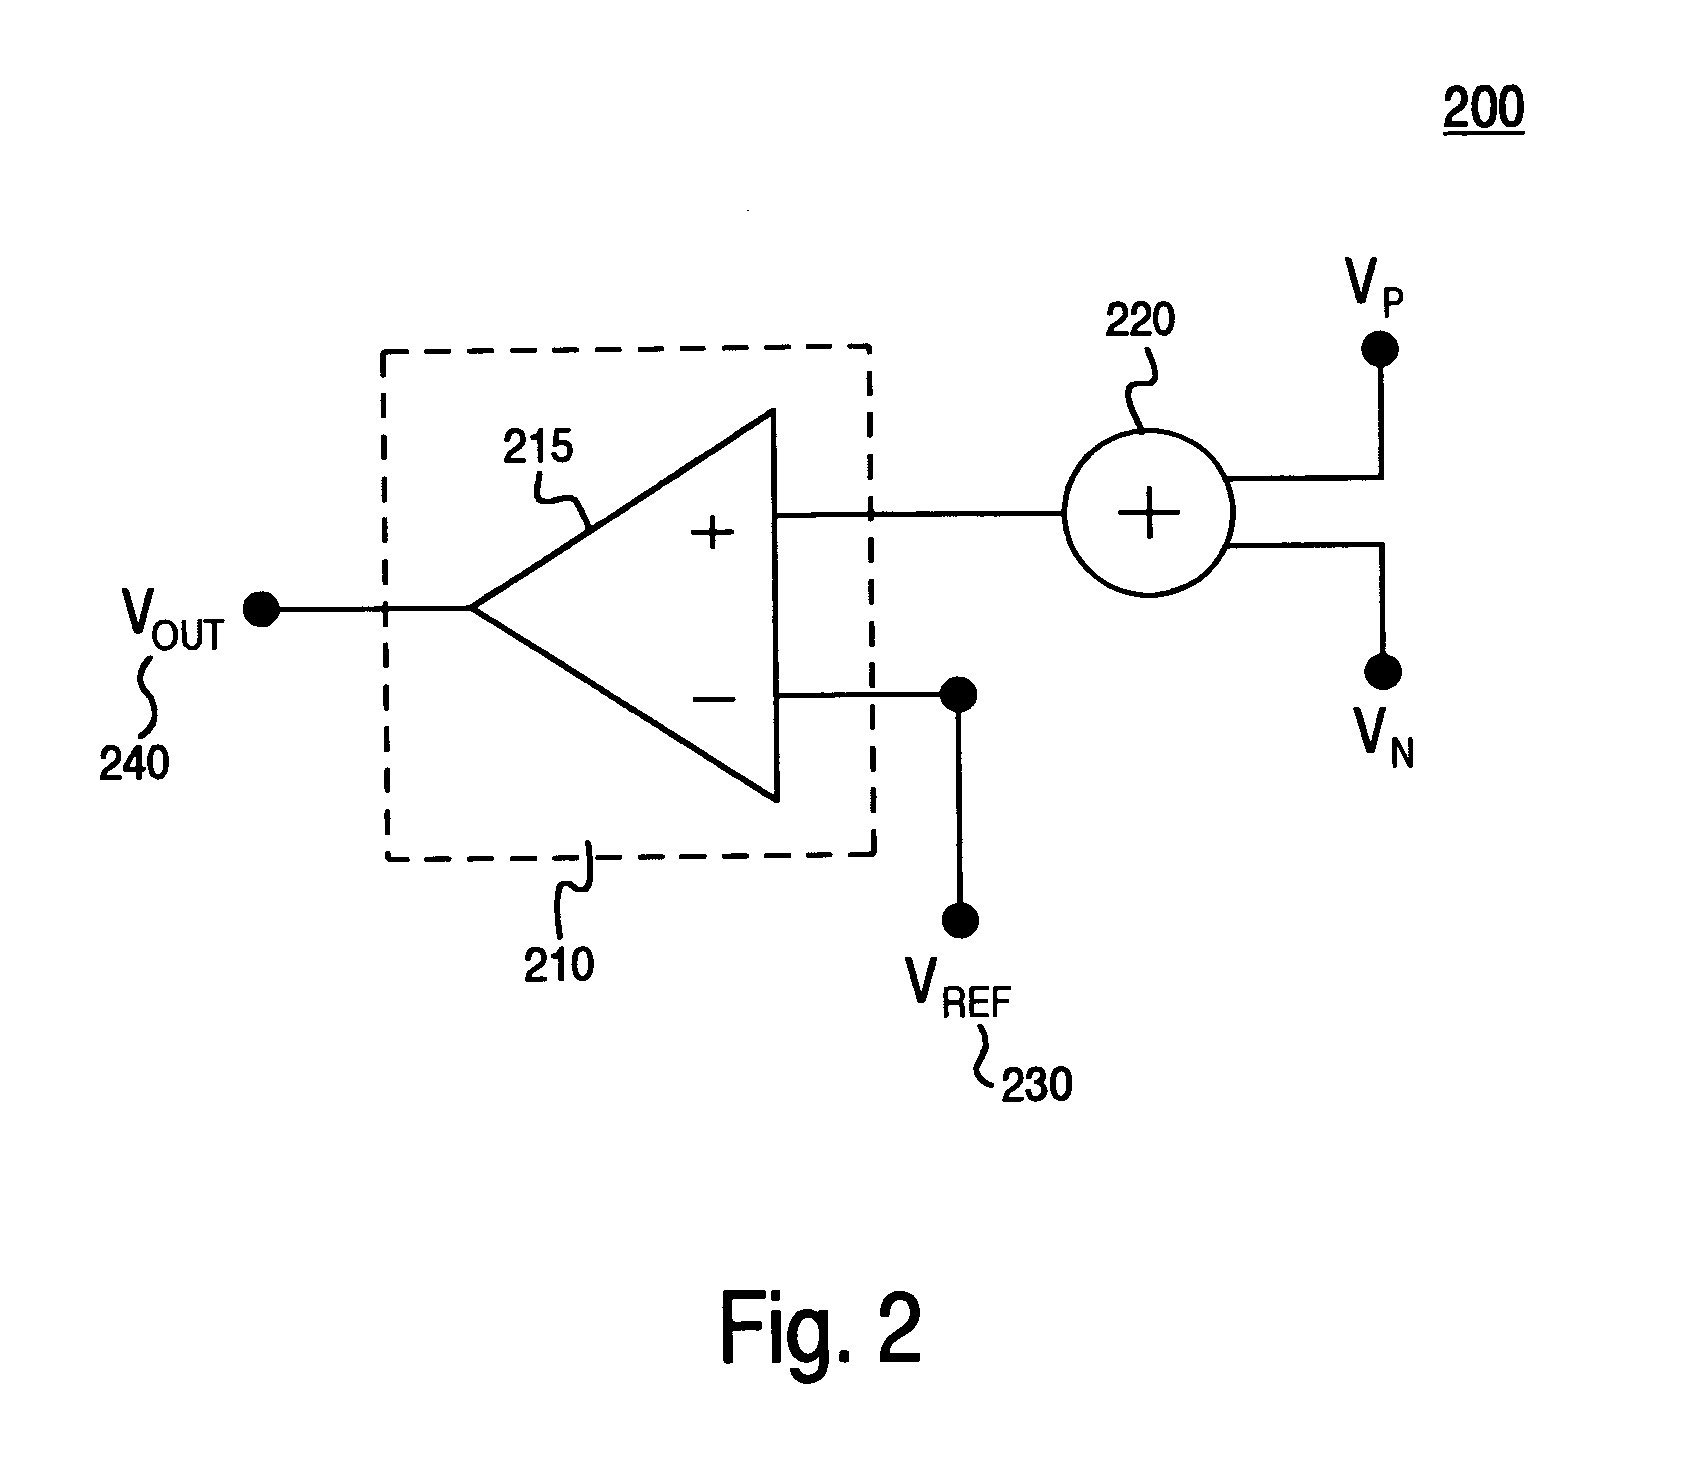 System and method for detecting when an external load is coupled to a video digital-to-analog converter